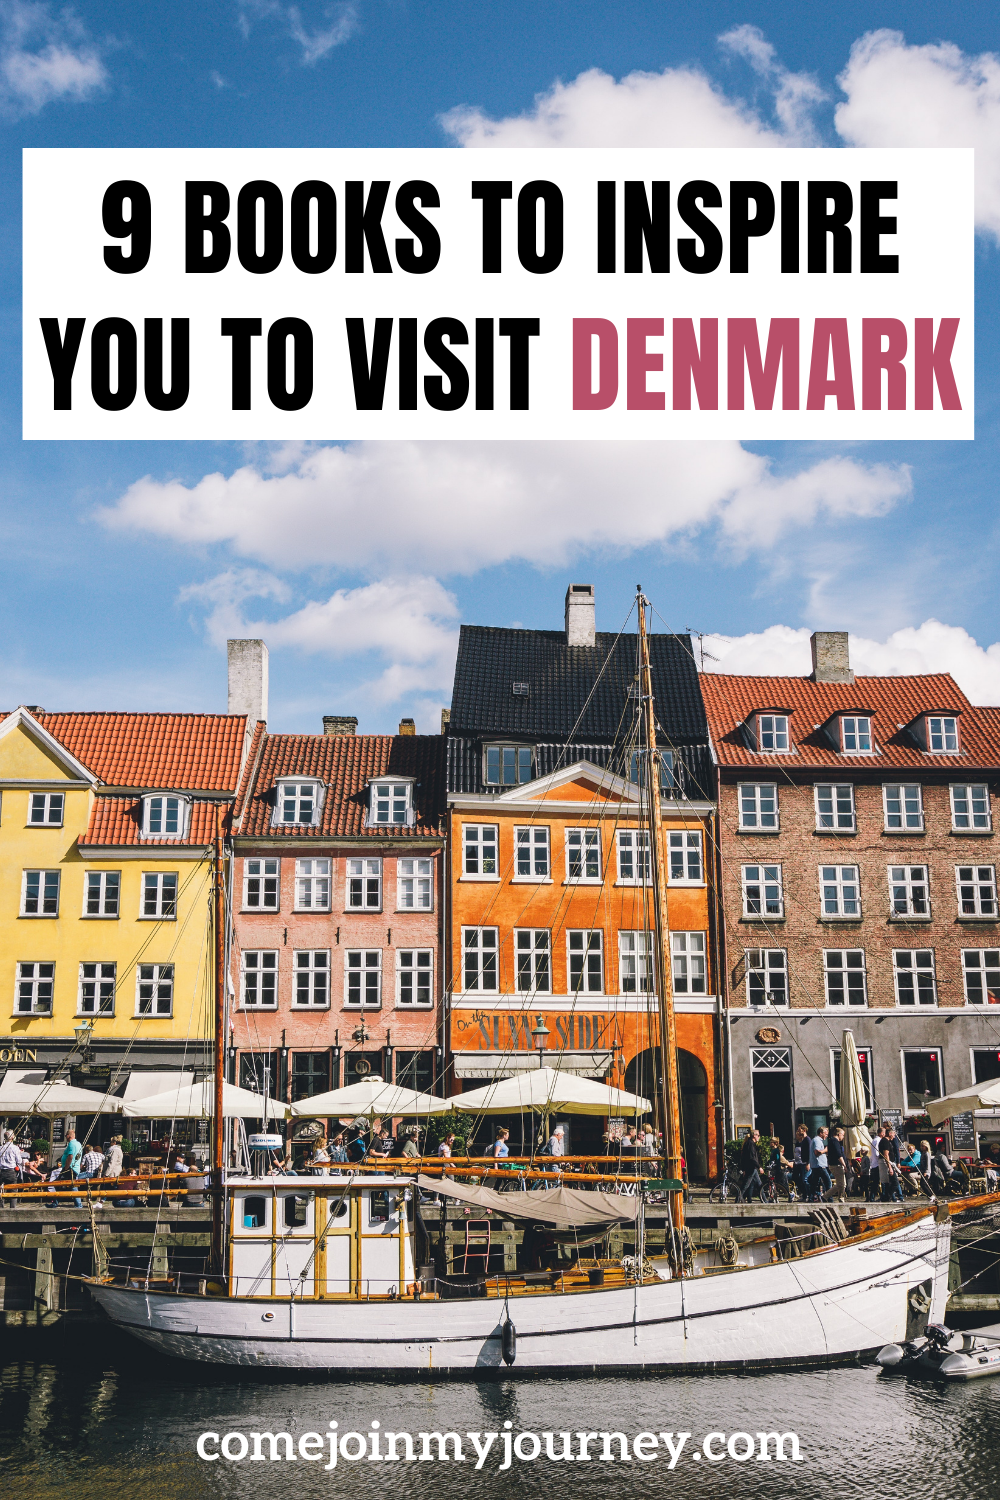 The Best Books About Denmark - Come Join My Journey